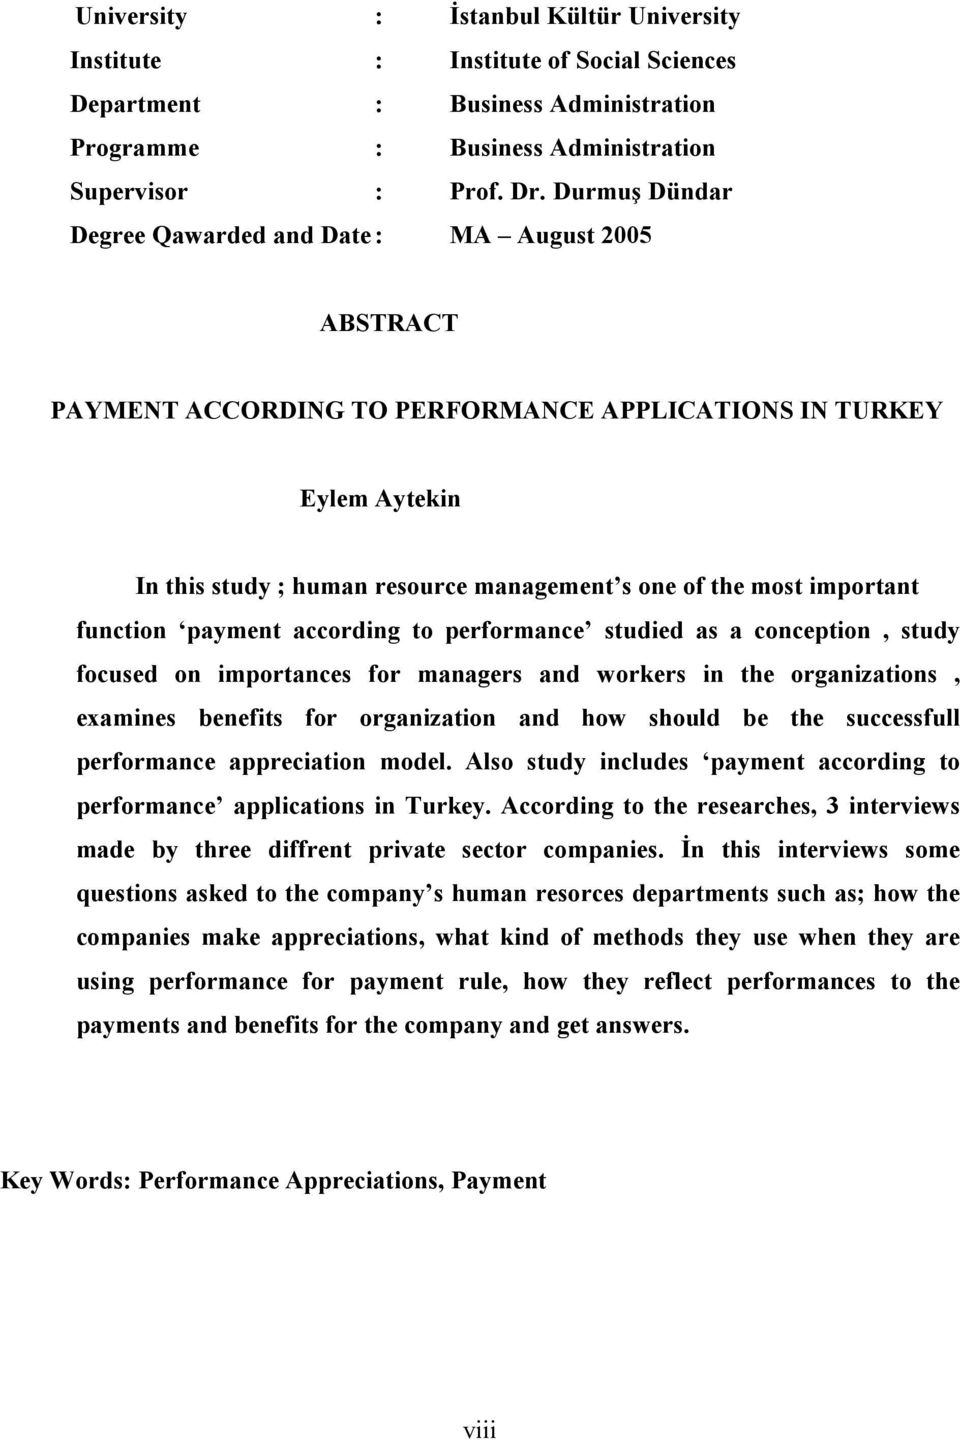 important function payment according to performance studied as a conception, study focused on importances for managers and workers in the organizations, examines benefits for organization and how